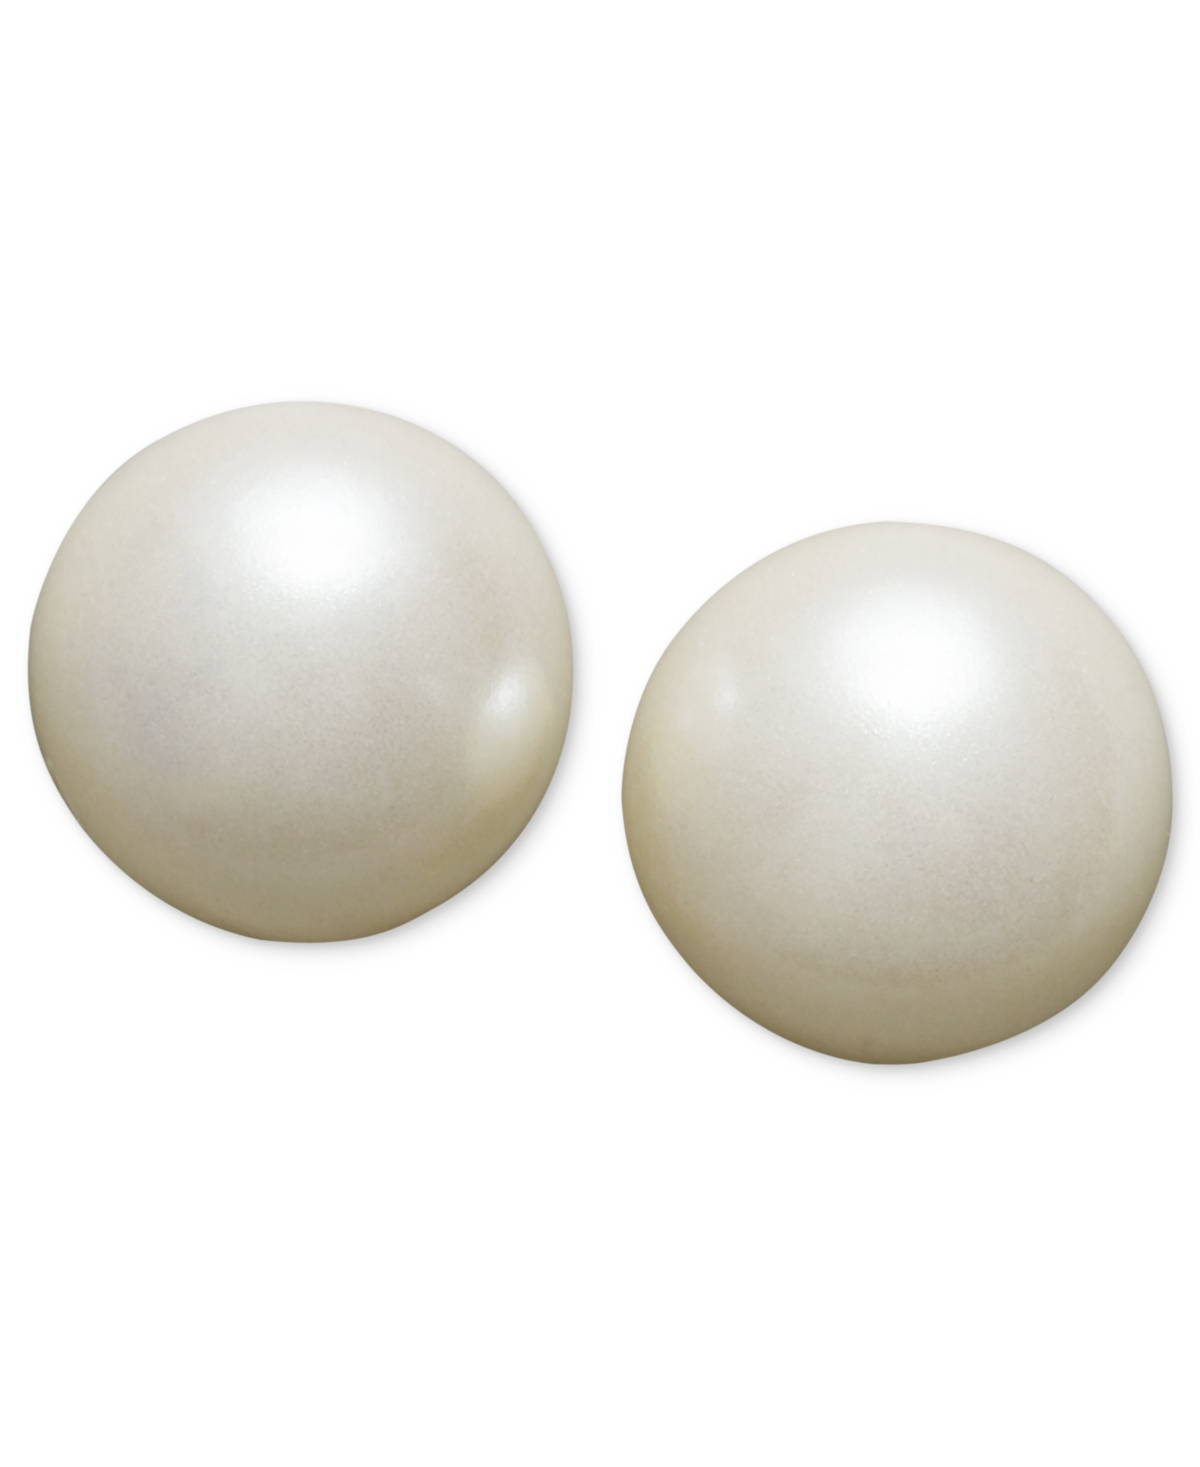 Silver-Tone Imitation Pearl (8mm) Stud Earrings, Created for Macy's - White